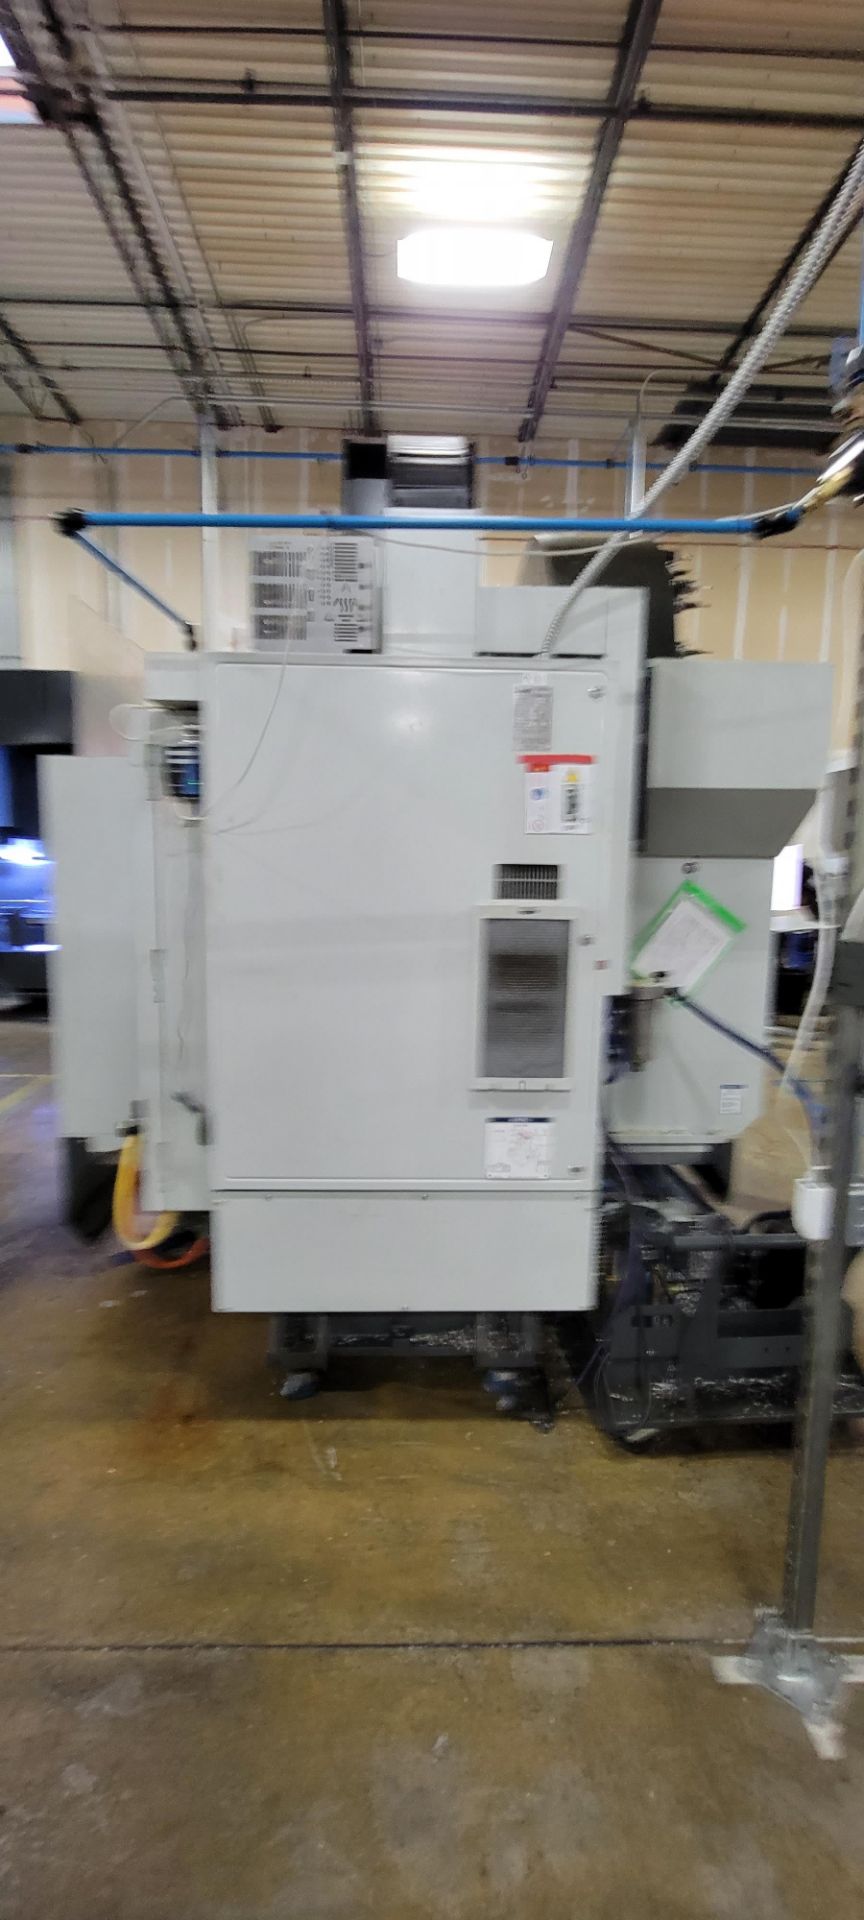 Haas VF-2SSYT 3-Axis CNC Vertical Machining Center - Image 15 of 18